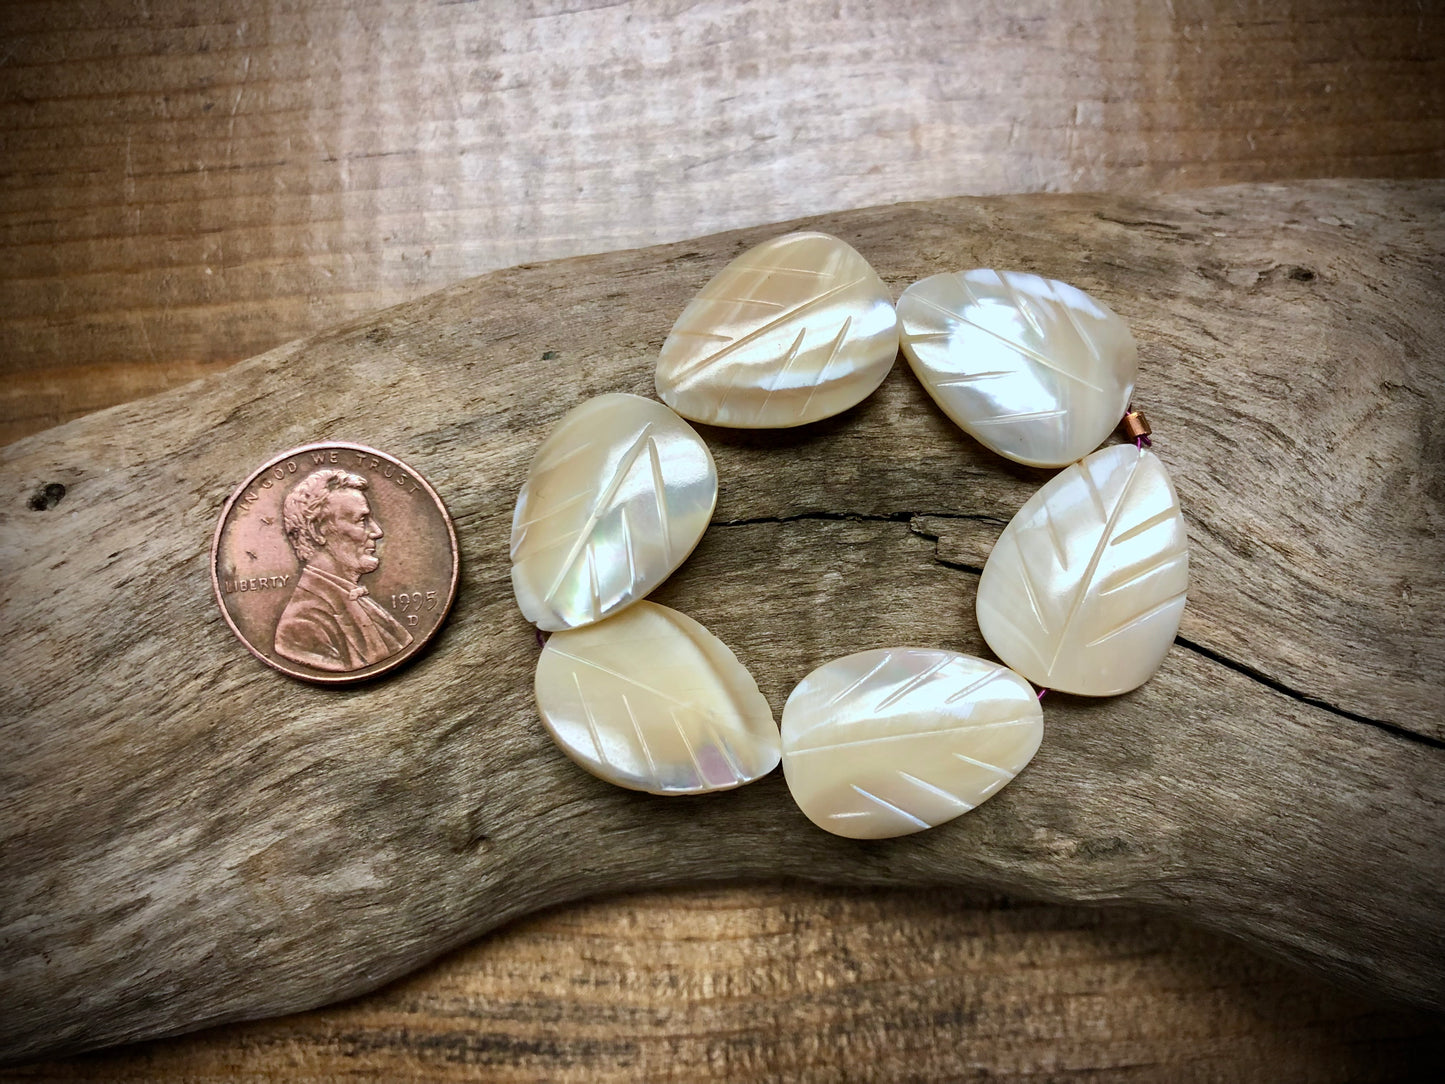 Vintage Mother of Pearl Leaf Beads - 14mm x 20mm